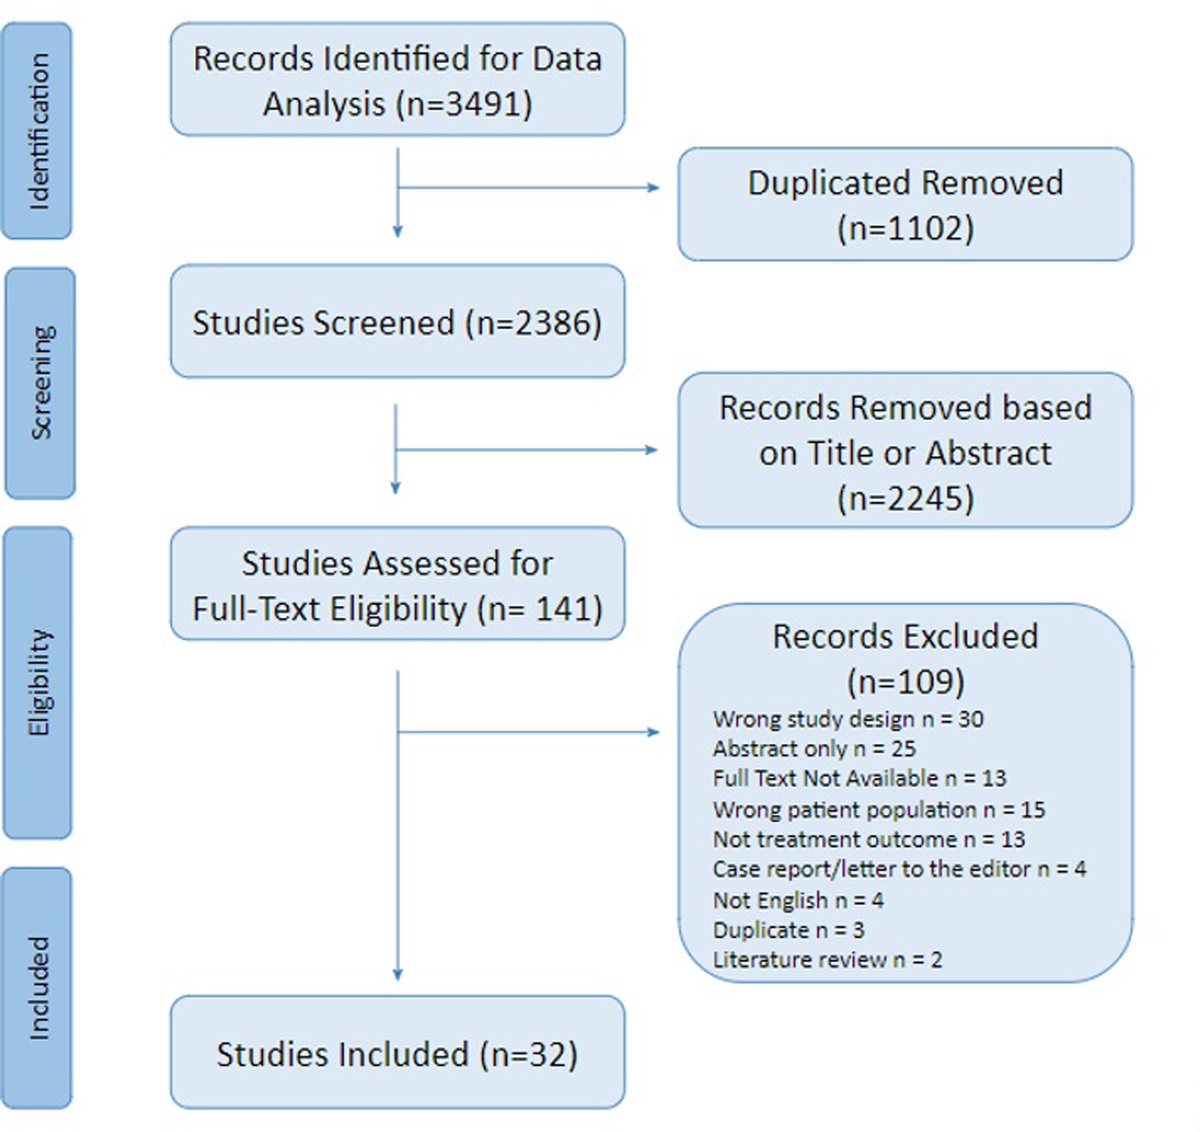 A Scoping Review of Treatment Outcome Measures for Vulvar Intraepithelial Neoplasia